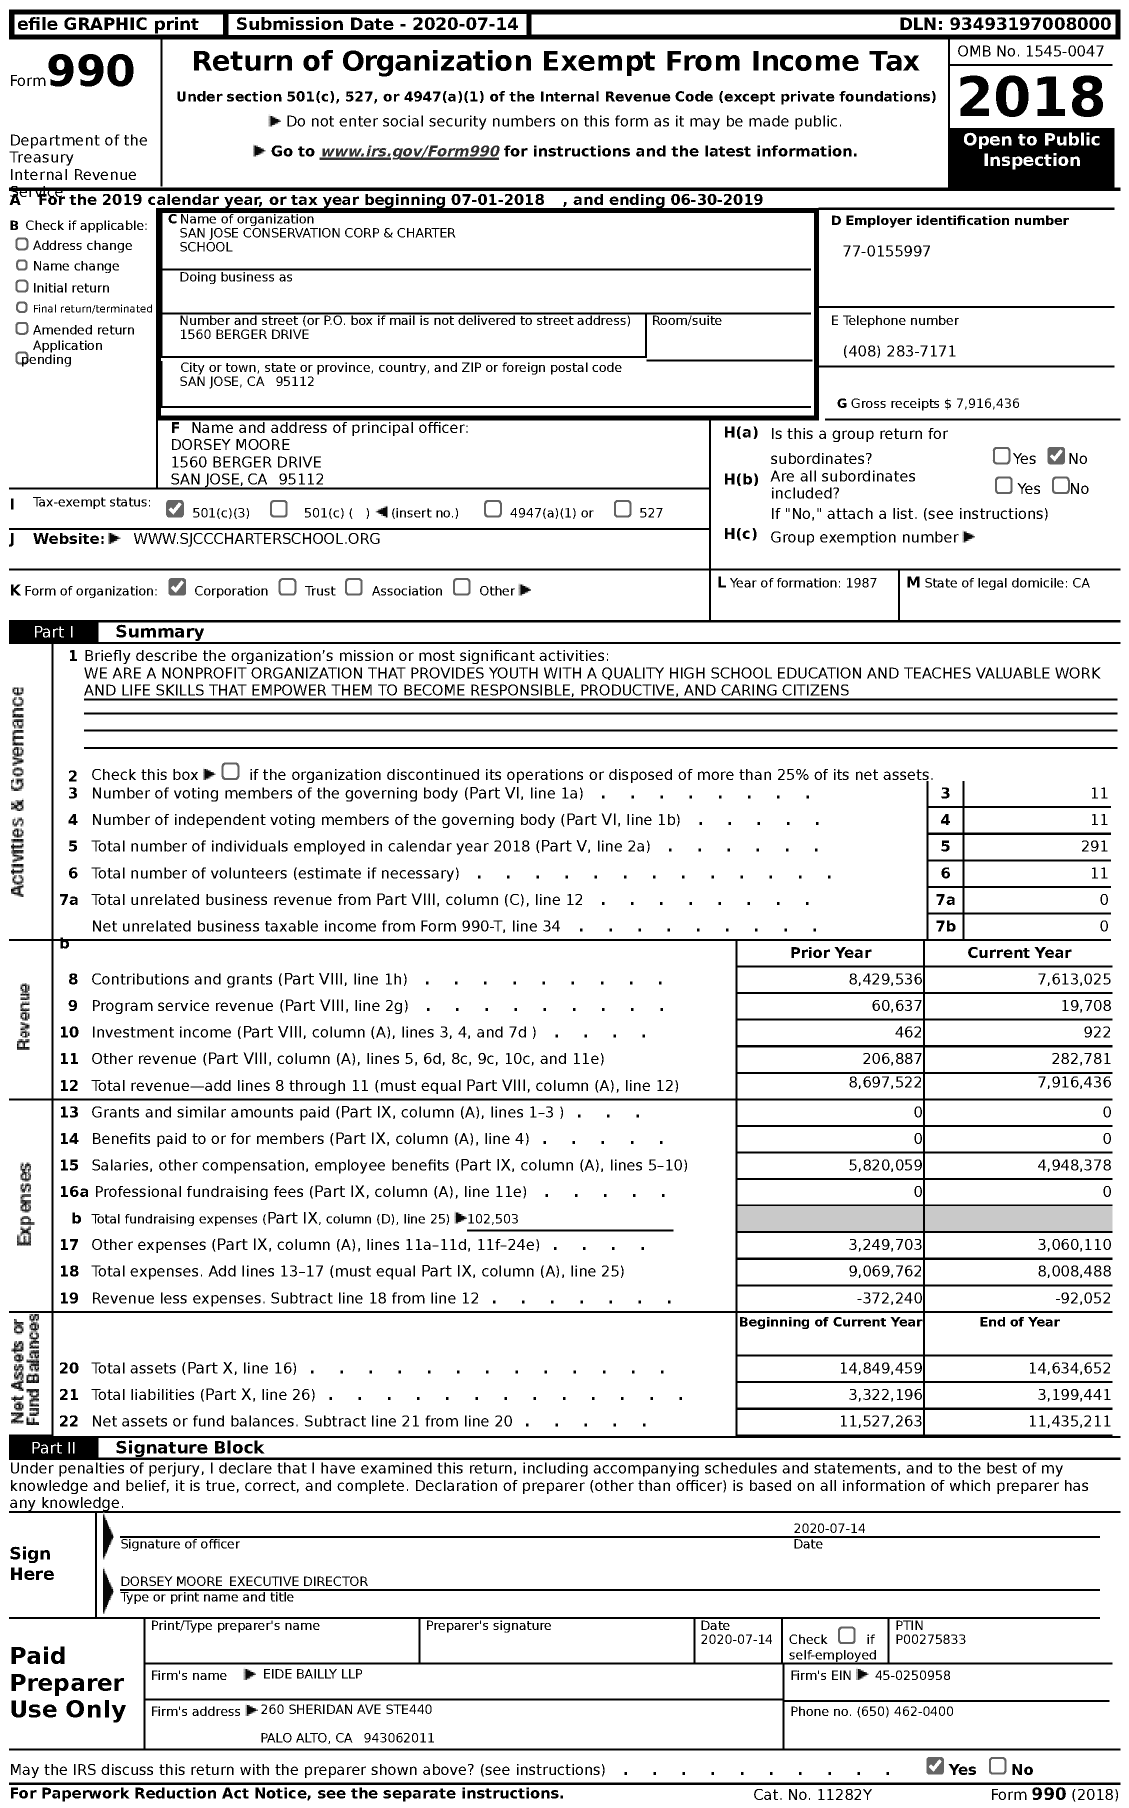 Image of first page of 2018 Form 990 for San Jose Conservation Corp and Charter School (SJCC)